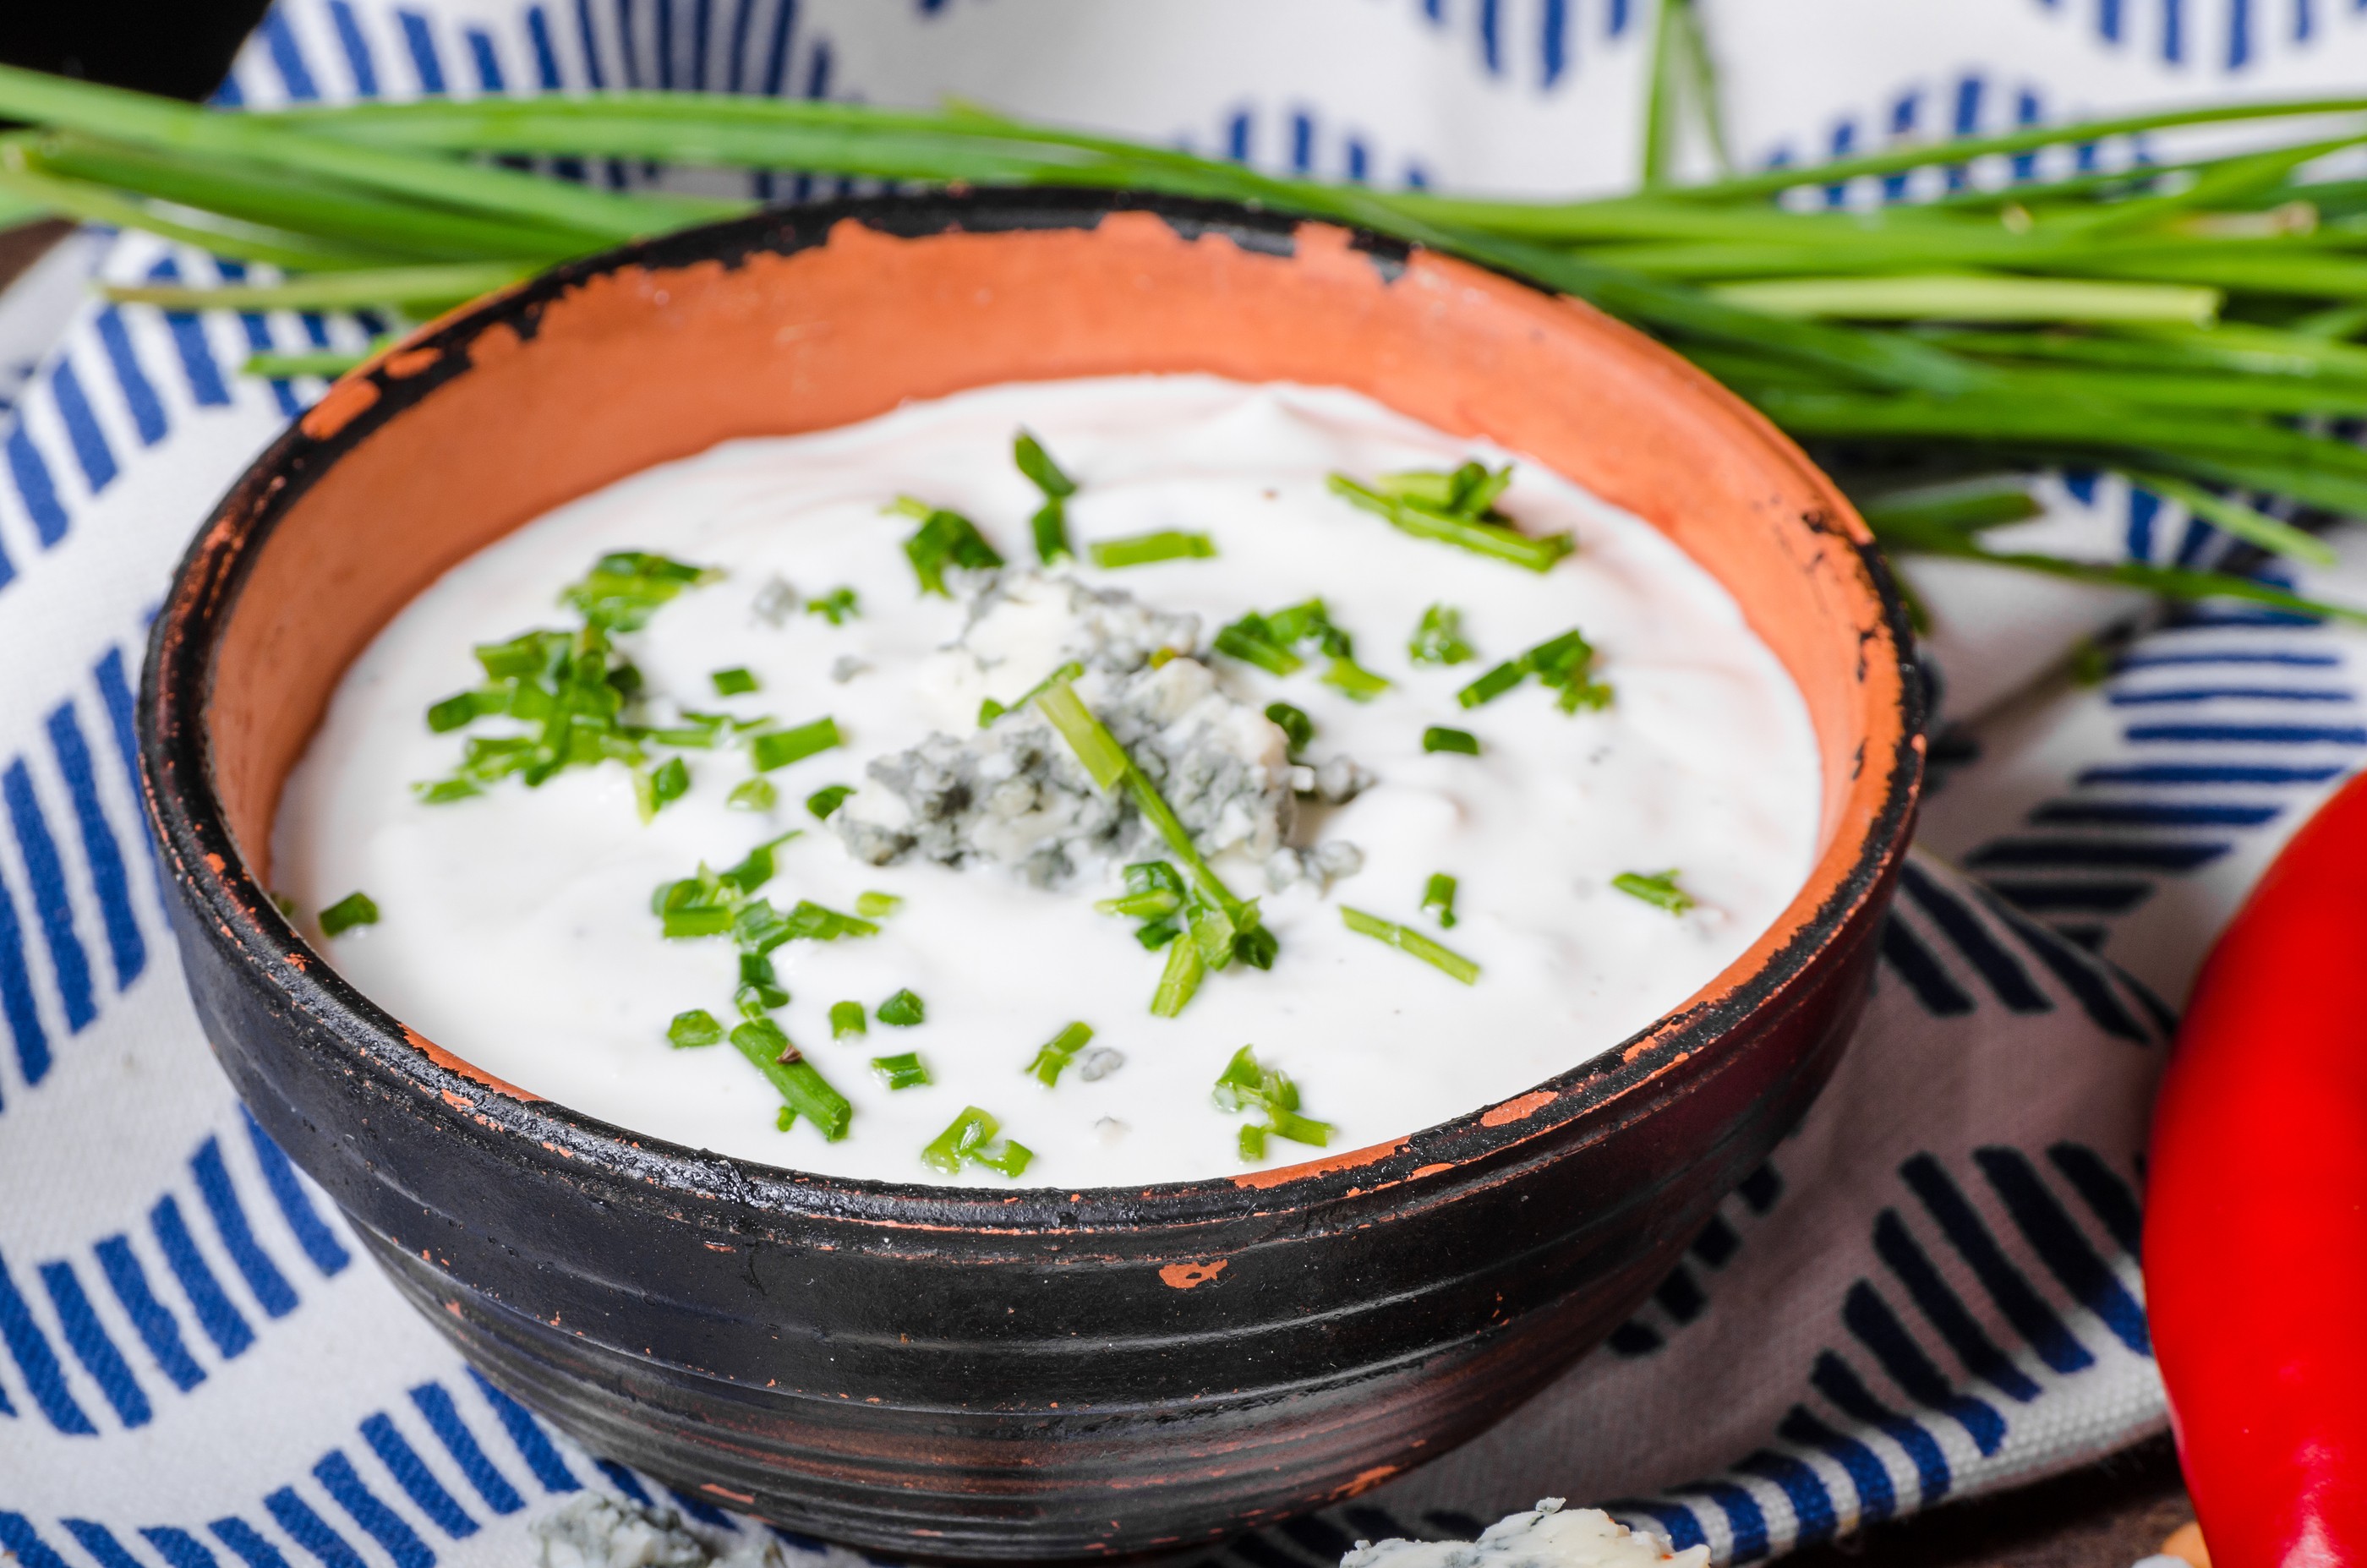 Spicy Blue Cheese Dip